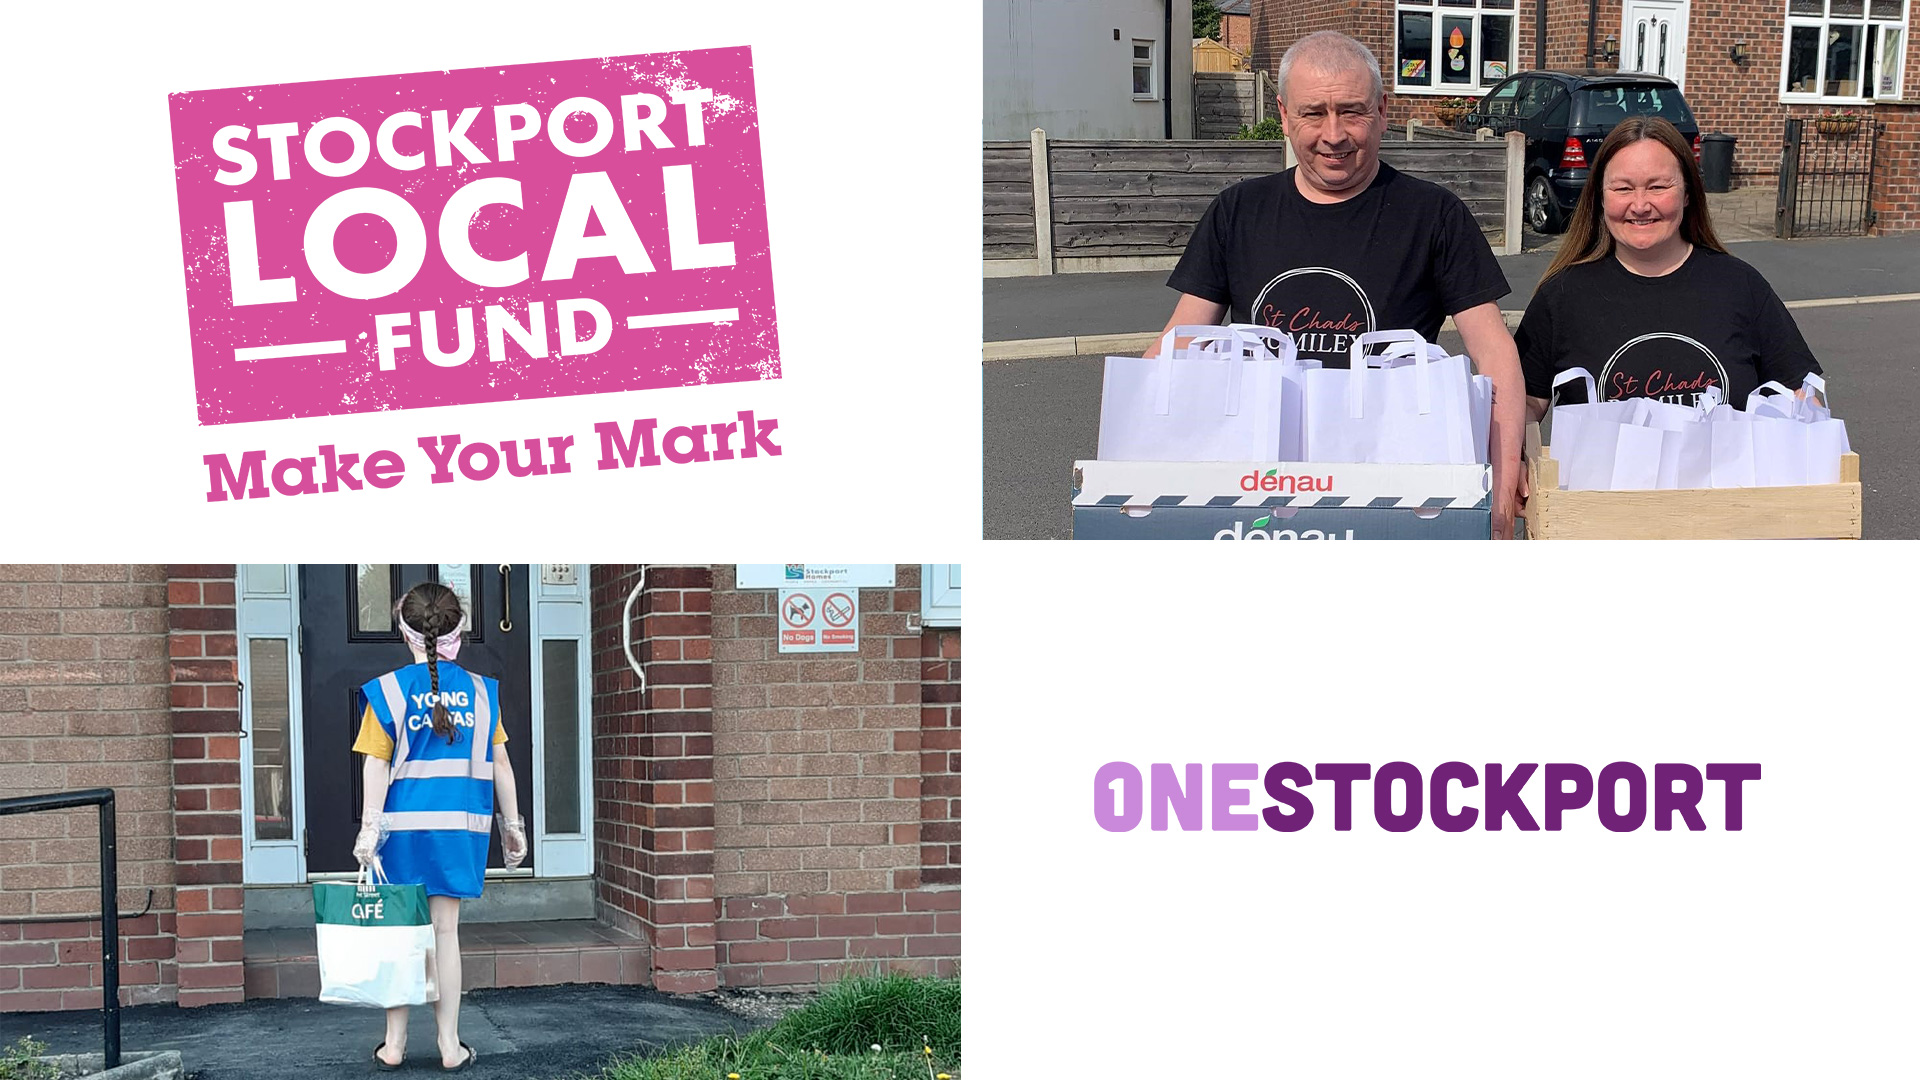 Stockport Local Fund - further grants available for communities